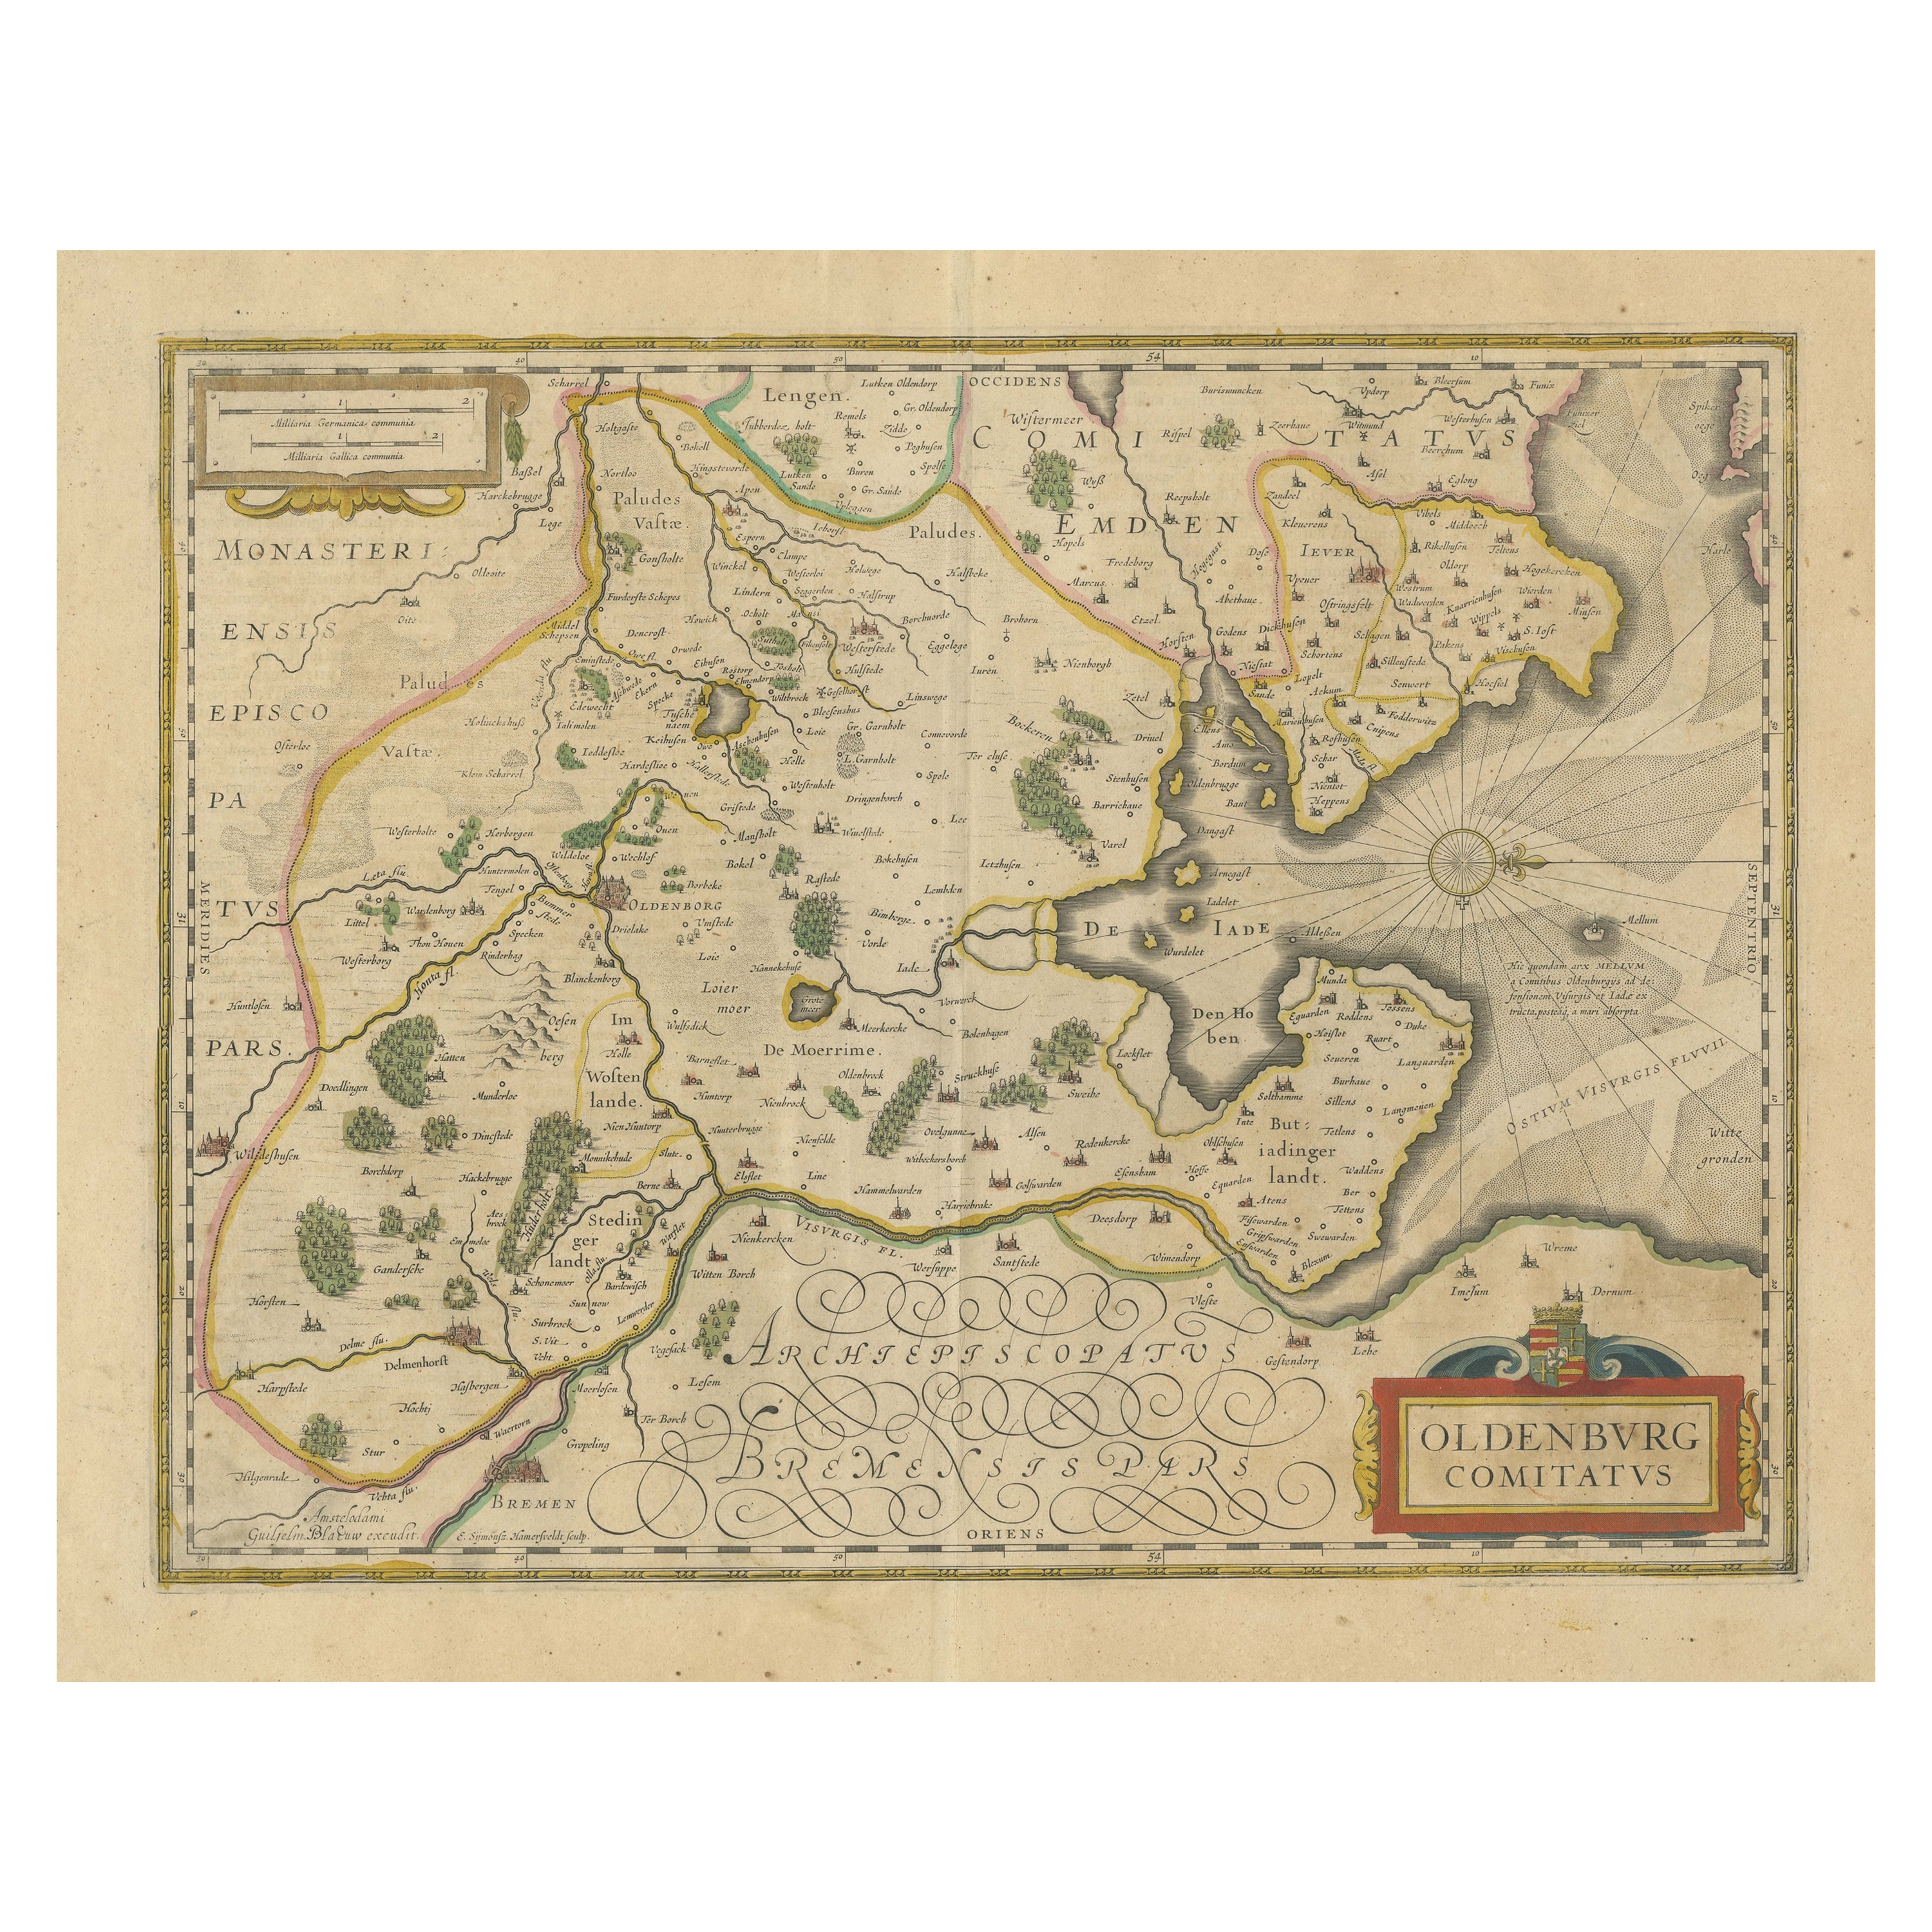 Antique Map of the Region of Oldenburg, Germany